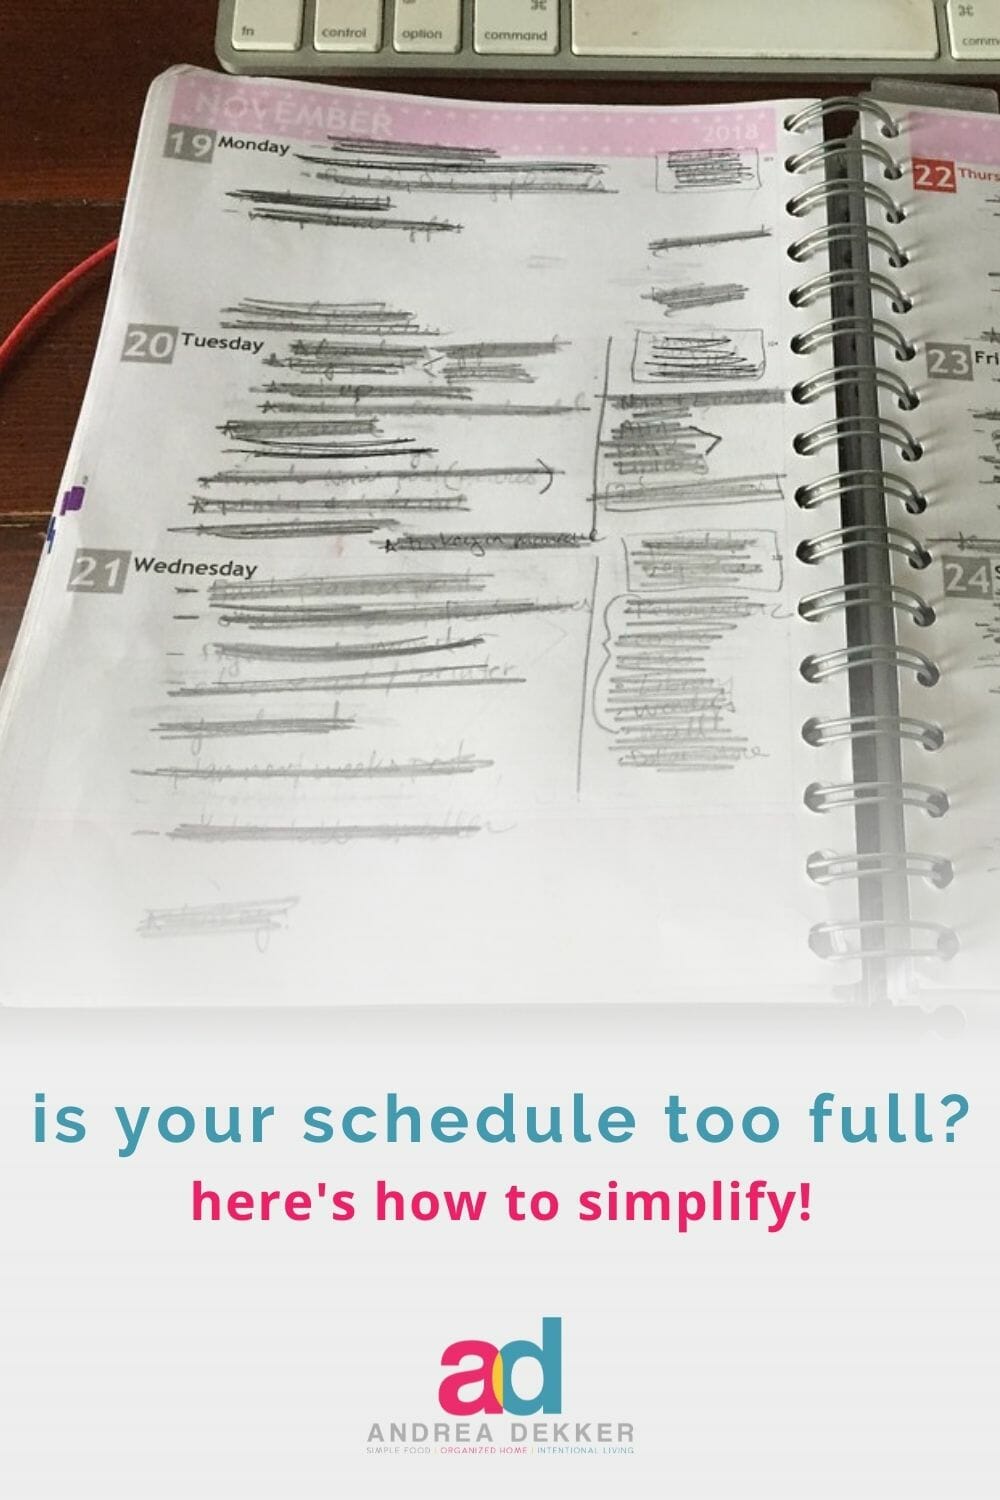 Do you feel overwhelmed with your current pace of life but not sure how to reel it back in again? Keep reading for steps you can take to simplify your schedule (starting today!) via @andreadekker